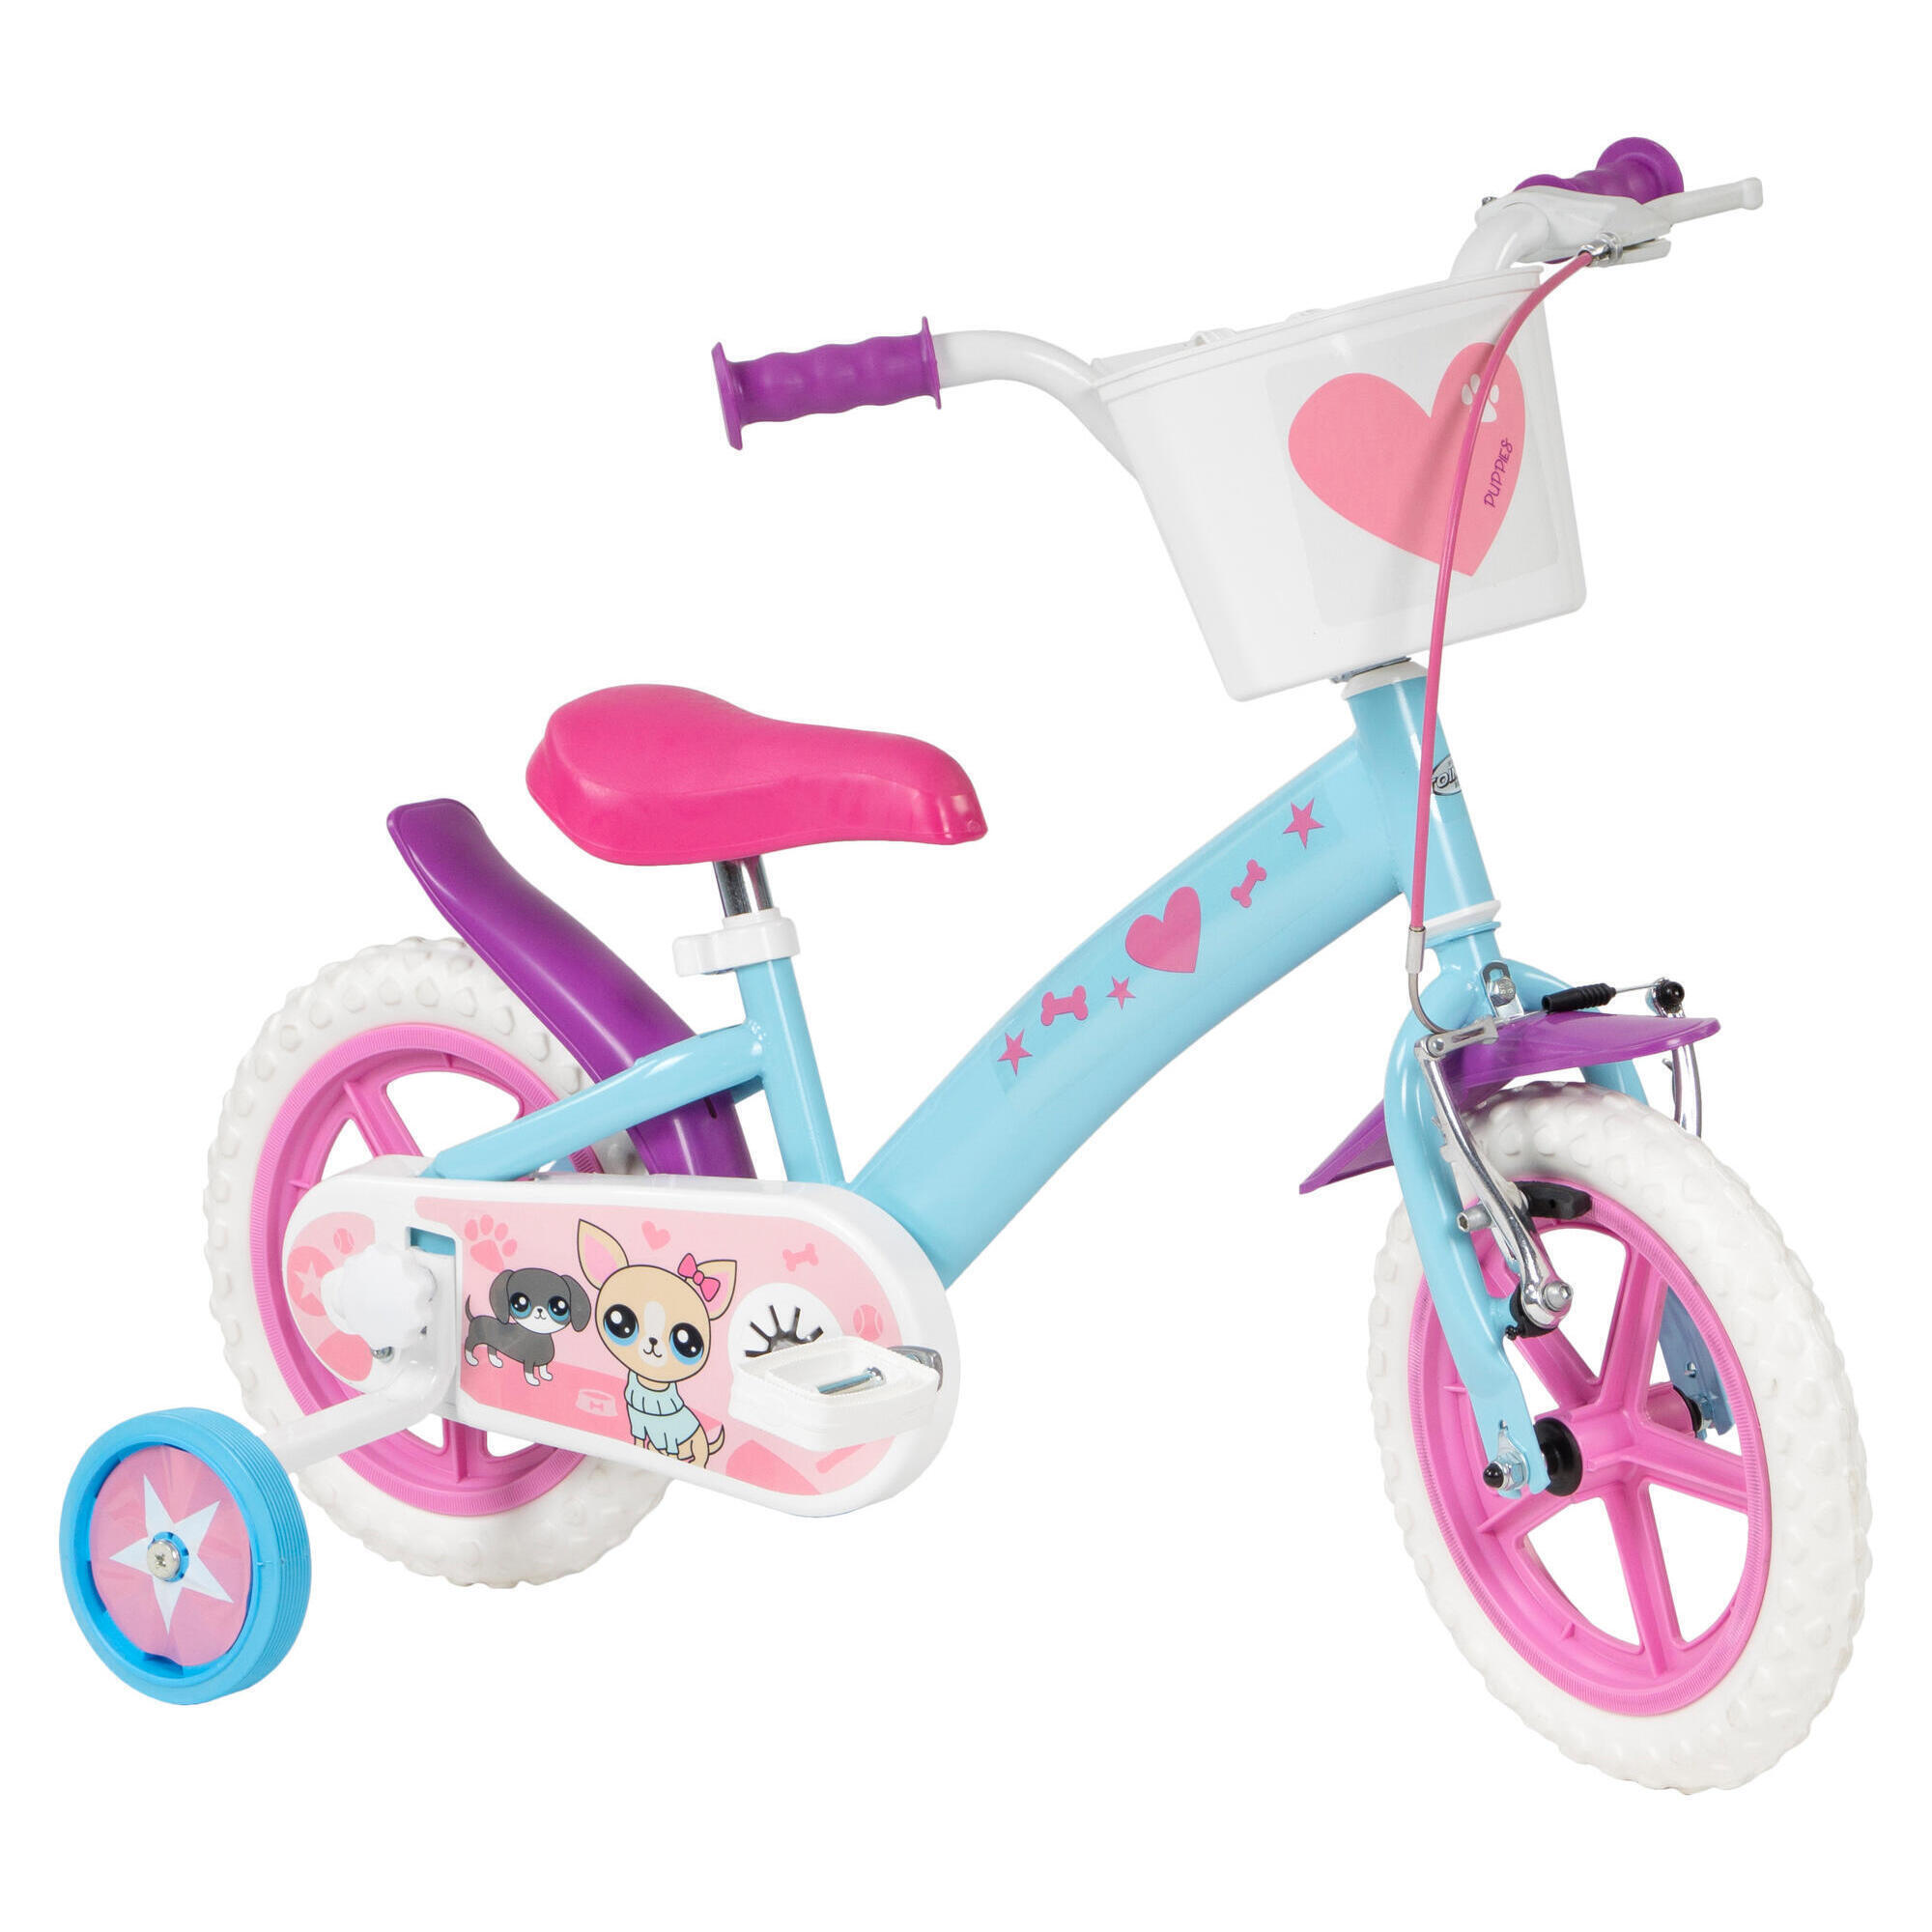 Pets 12" Bicycle 1/5